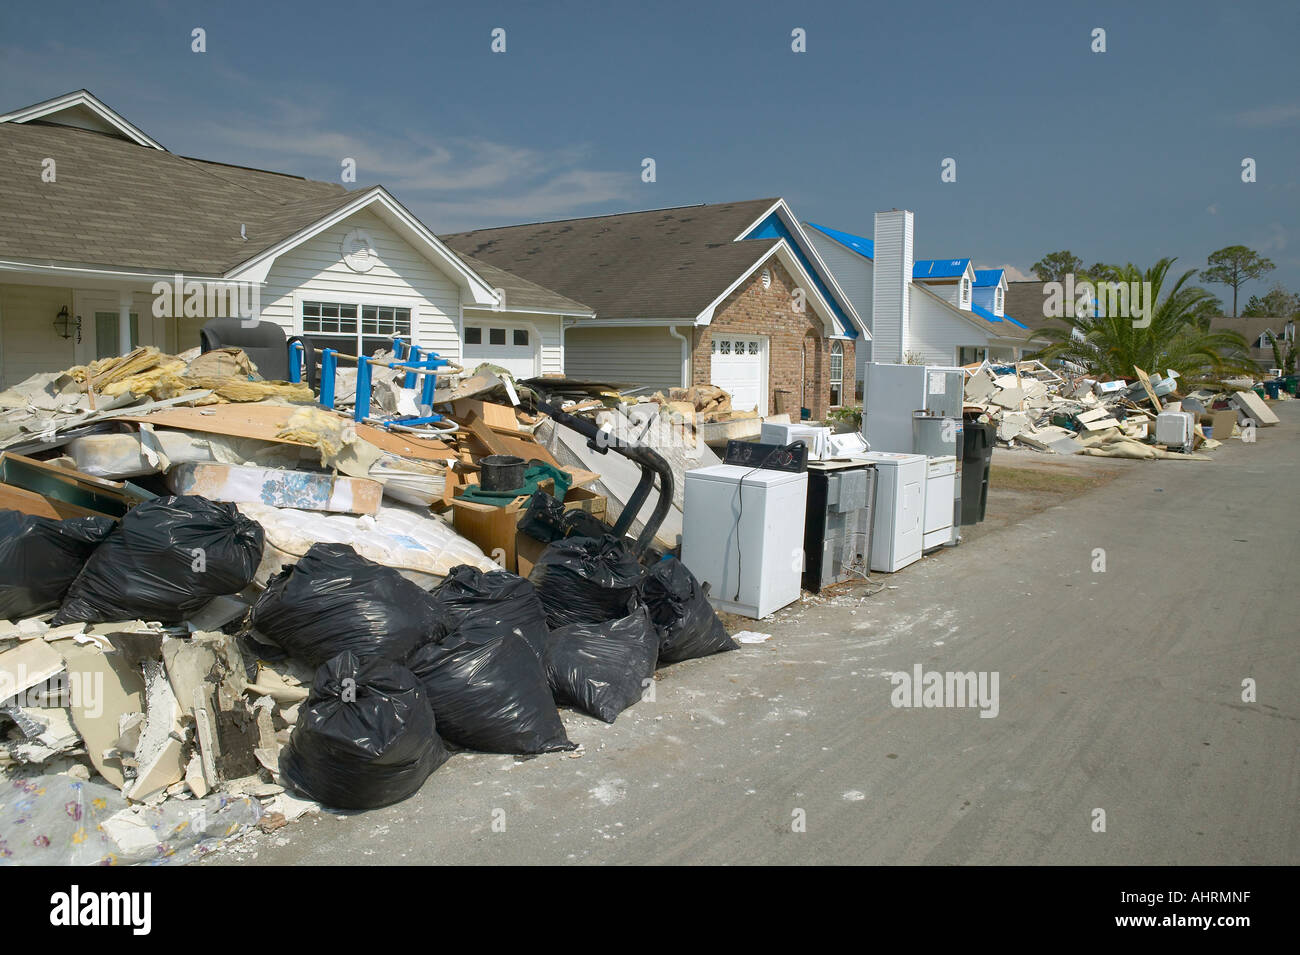 Row of suburban houses with debris after Hurricane Ivan in Pensacola Florida Stock Photo